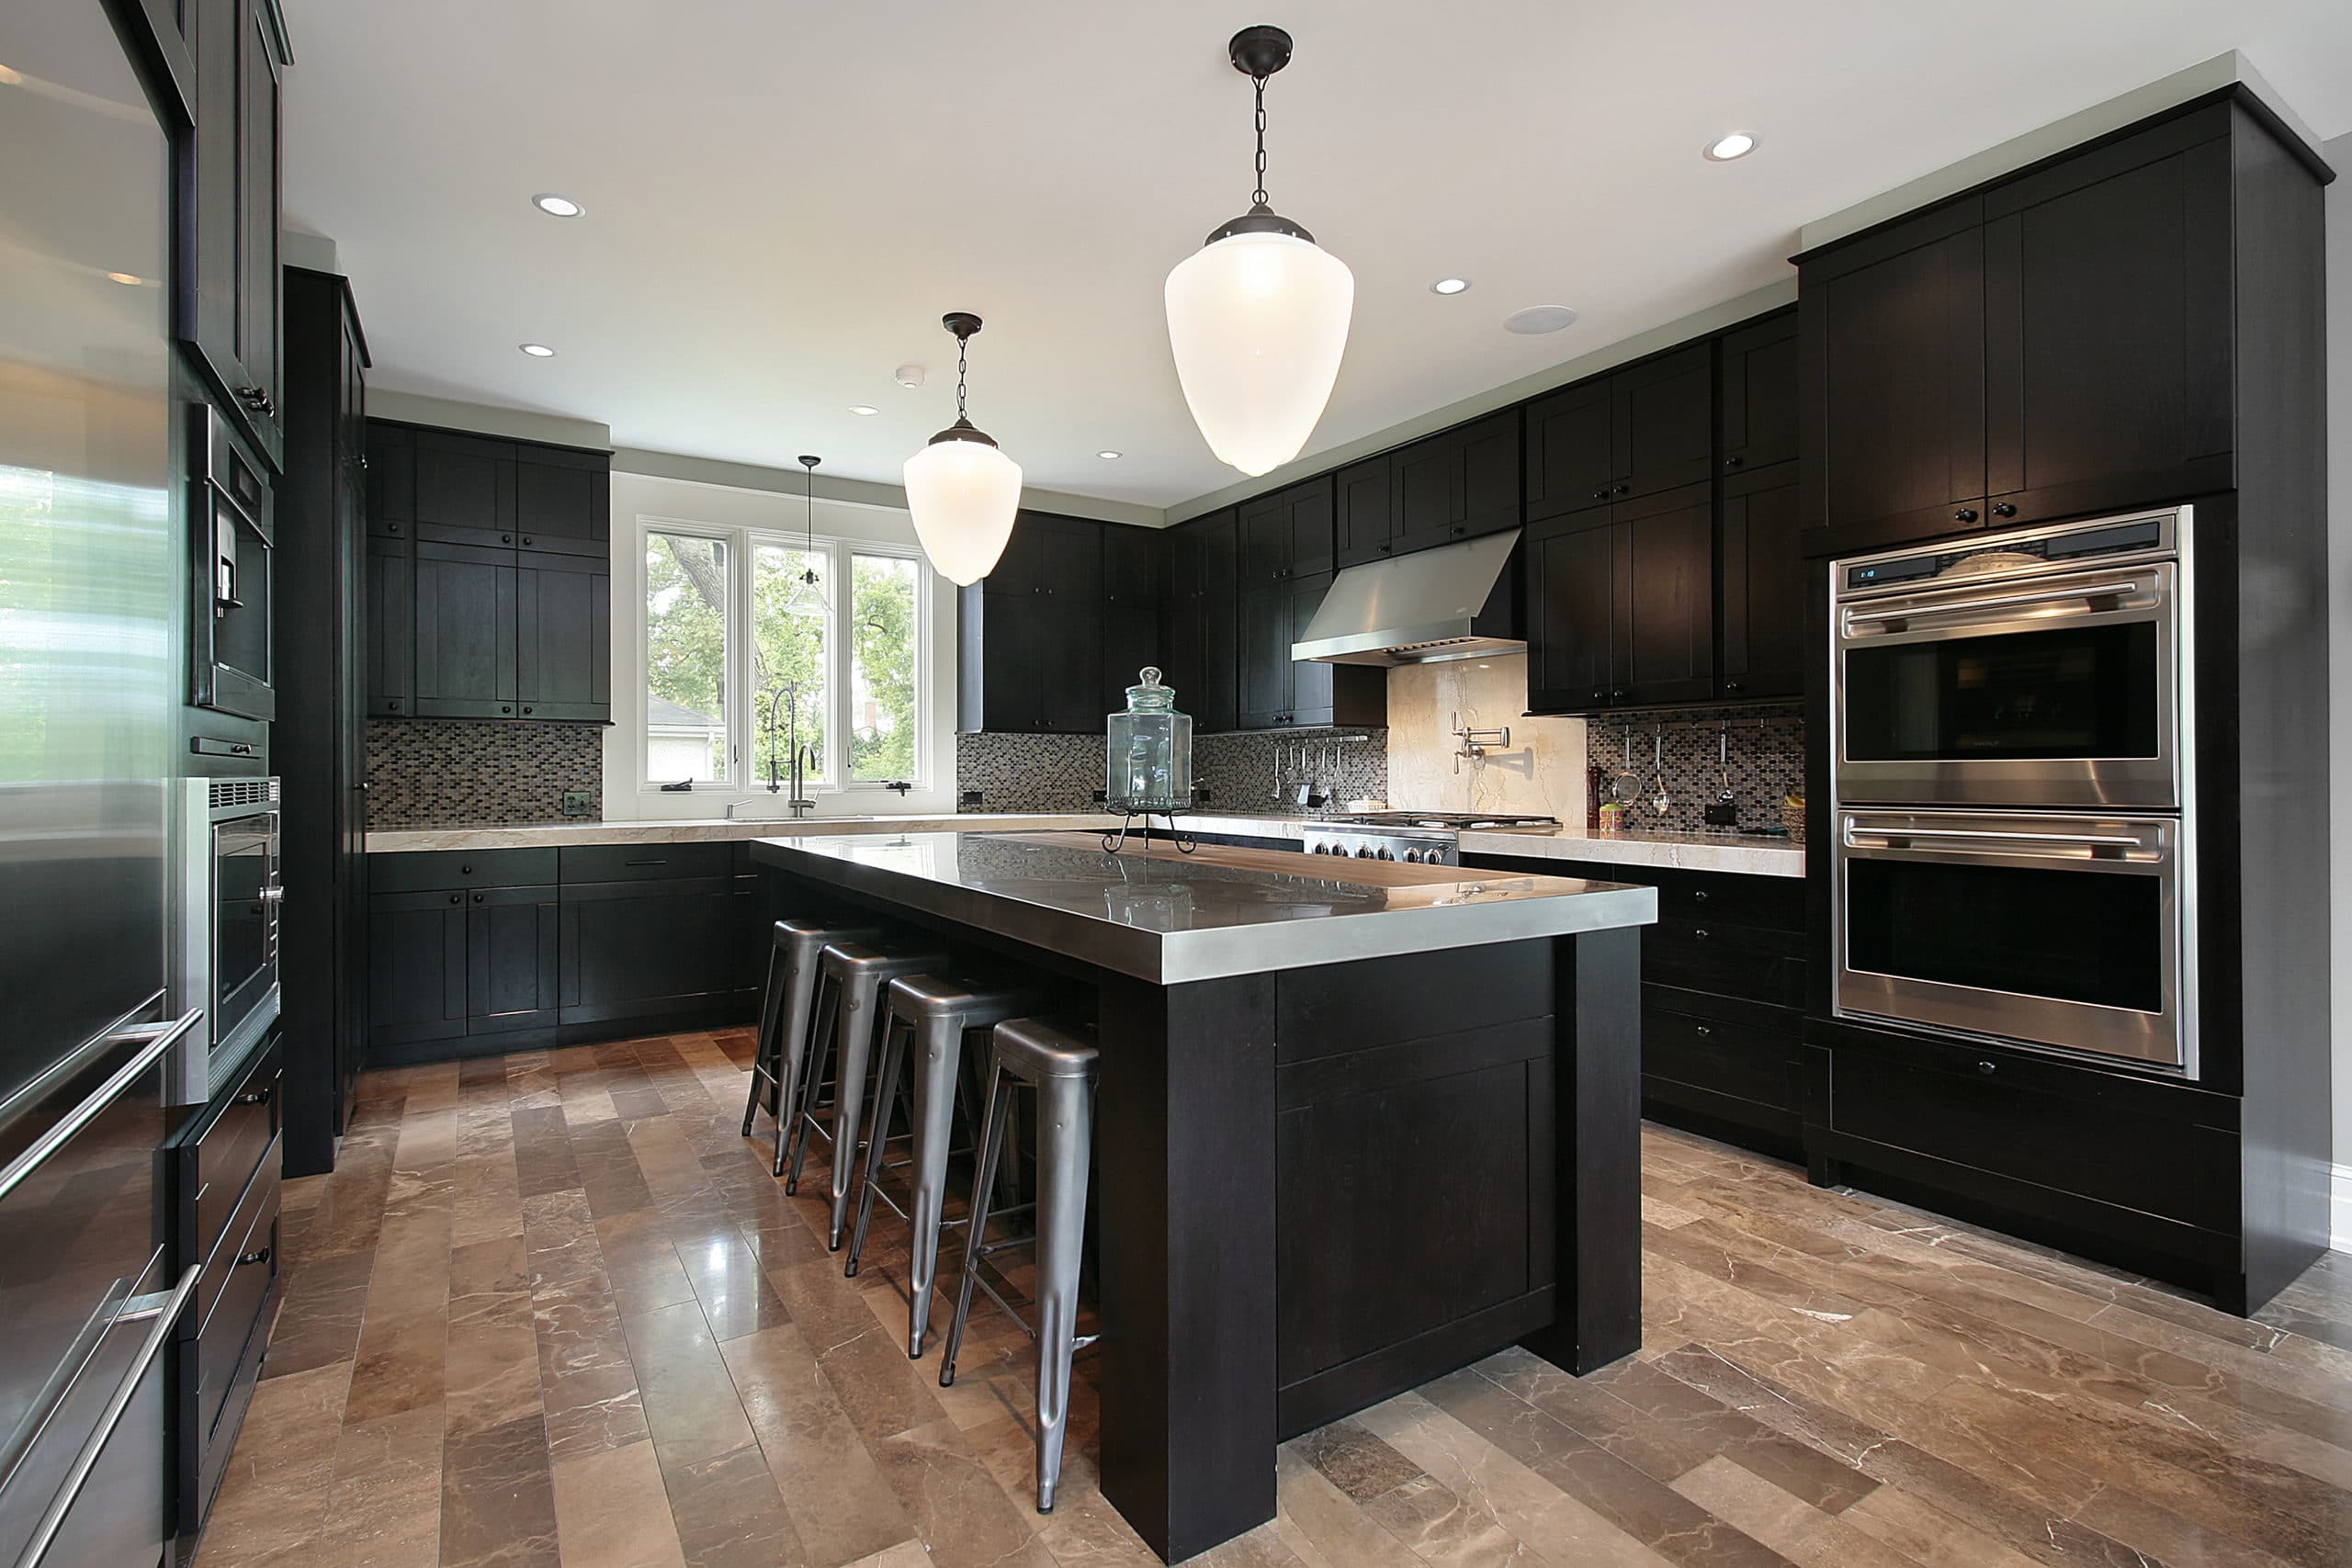 Kitchen Remodeling Falls Church VA promo in luxury home with dark wood cabinetry